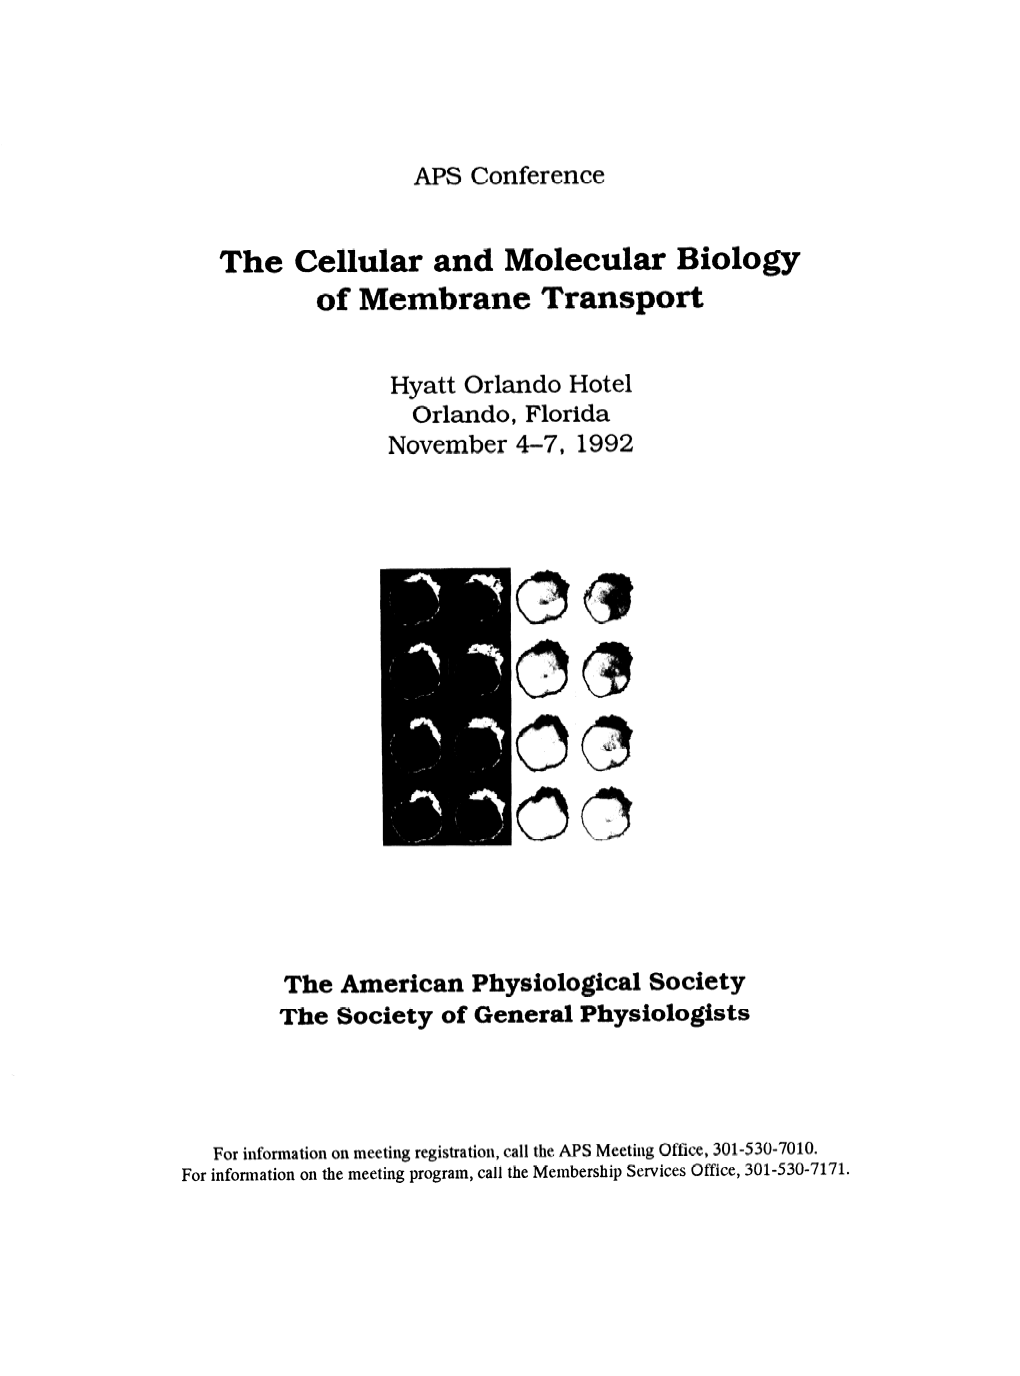 The Cellular and Molecular Biology of Membrane Transport